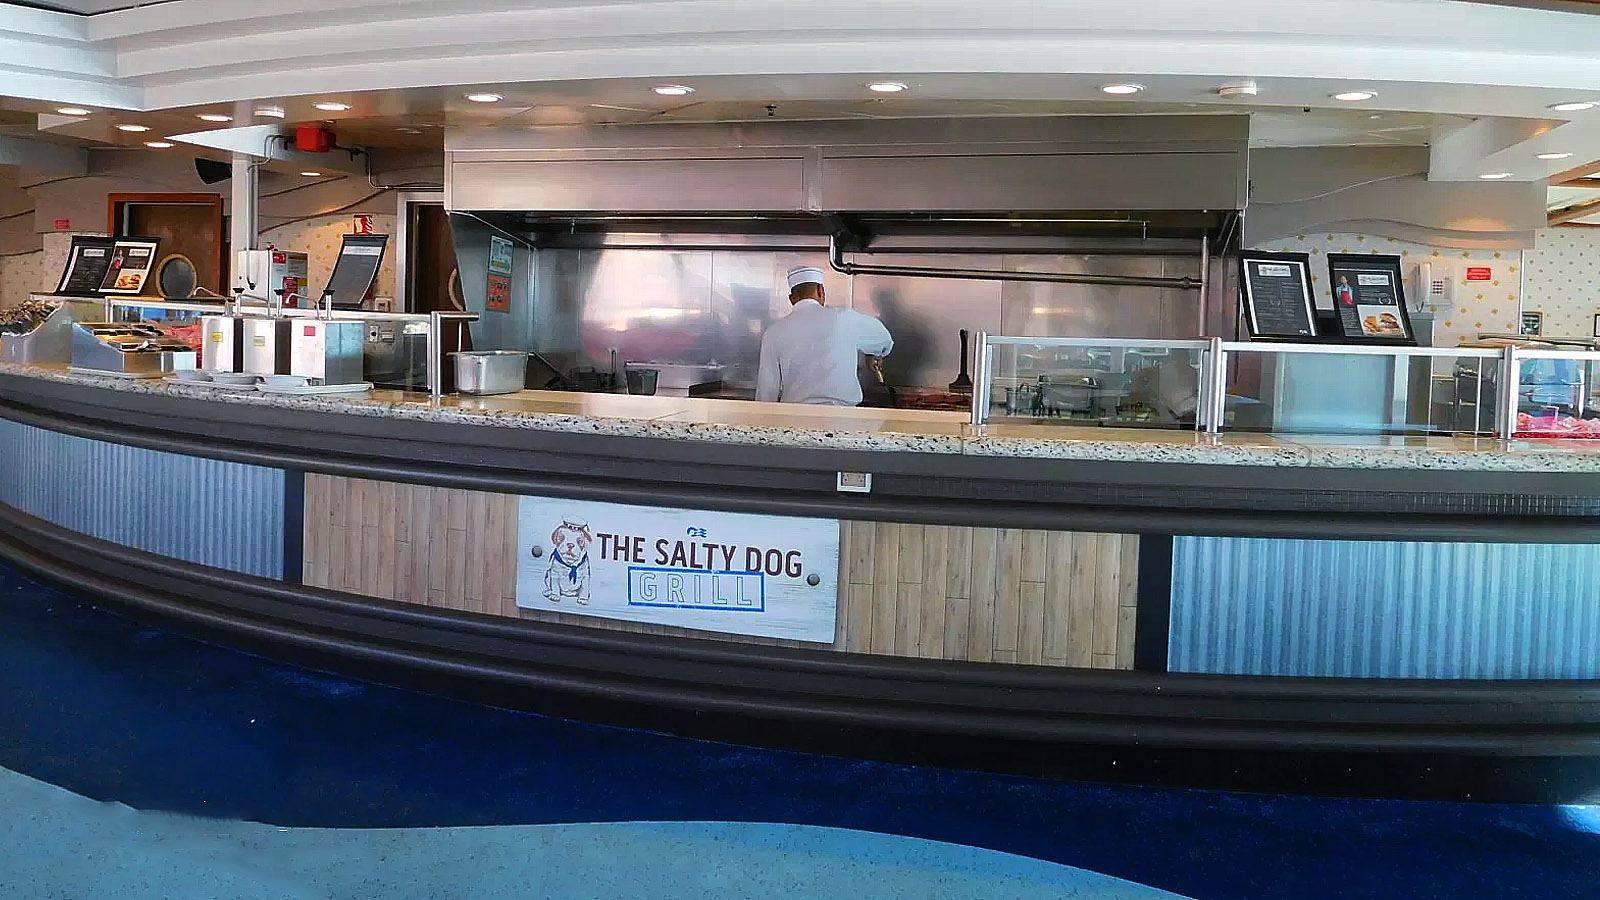 The Salty Dog Grill on the Princess Cruises Ruby Princess